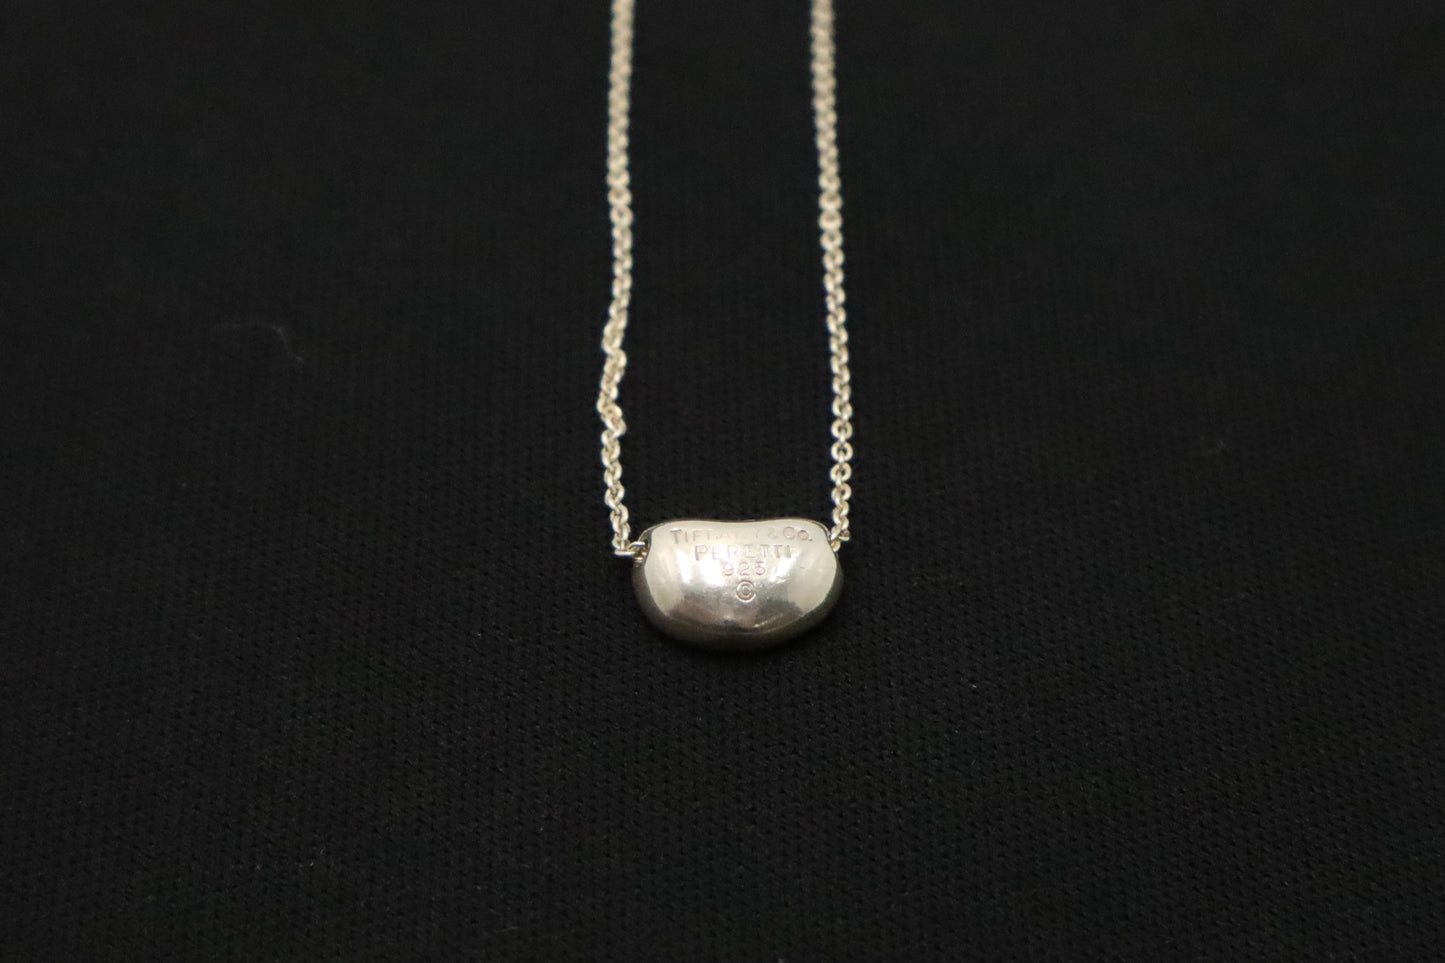 Tiffany&Co. Bean Necklace in Sterling Silver